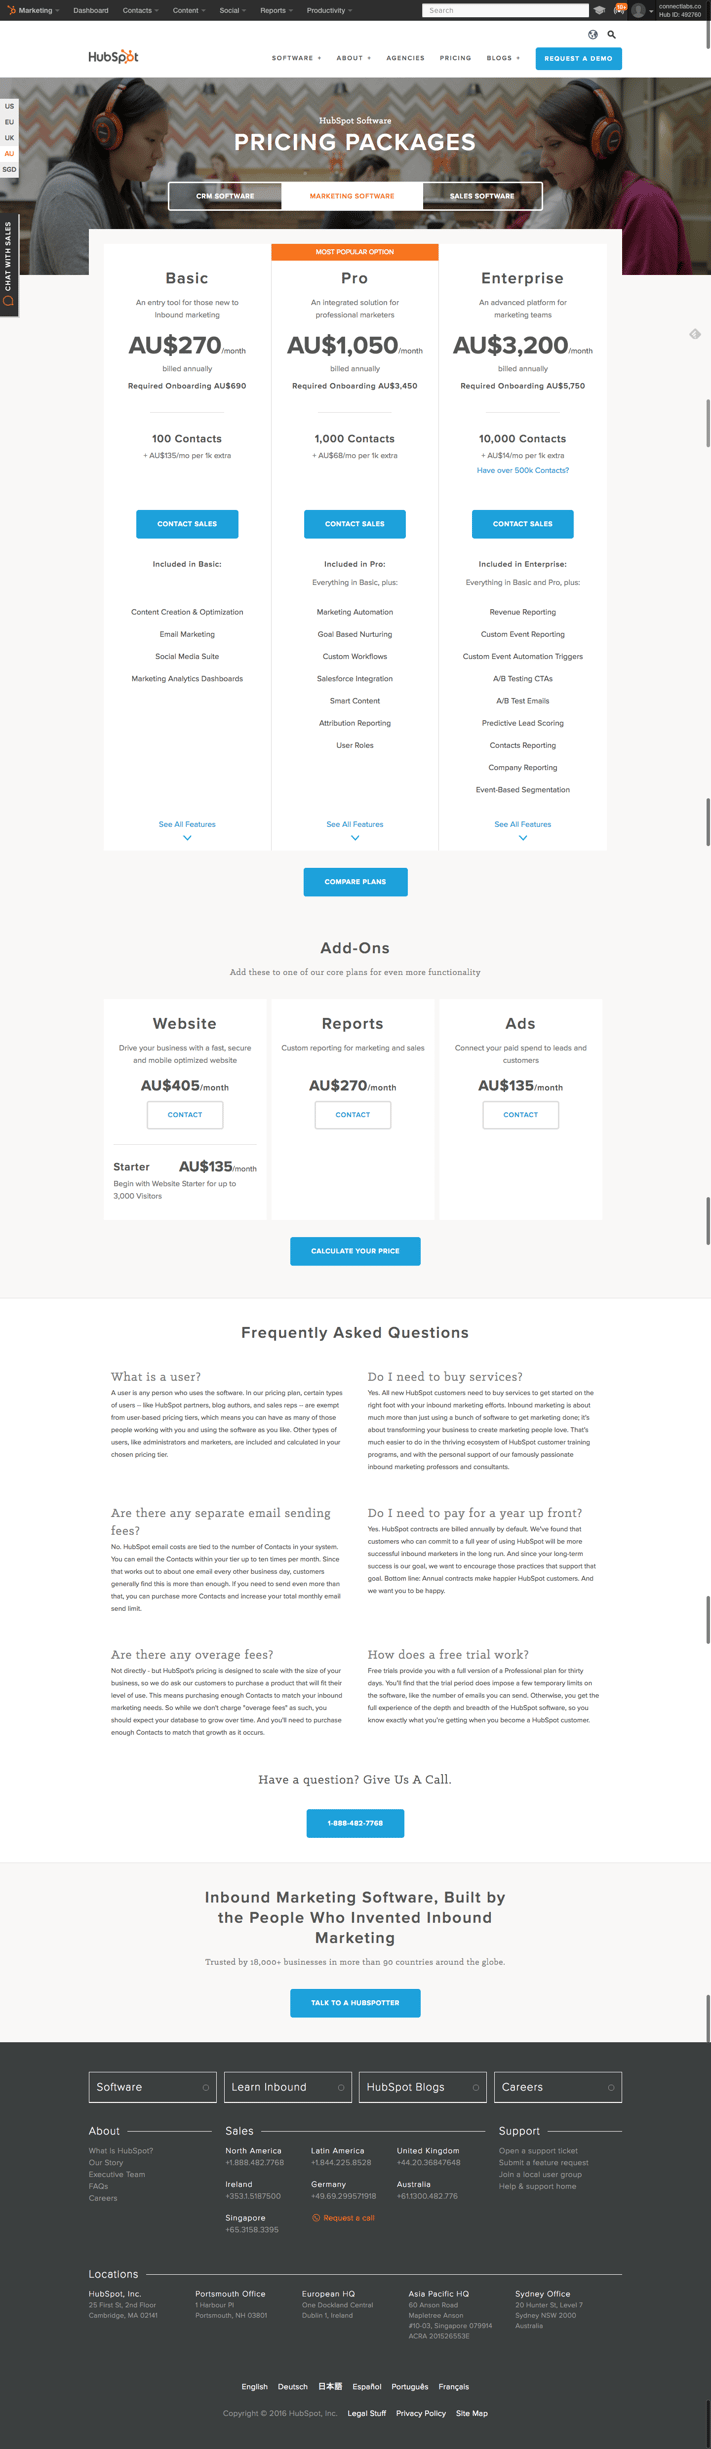 HubSpot_Marketing_Pricing_full_page.png